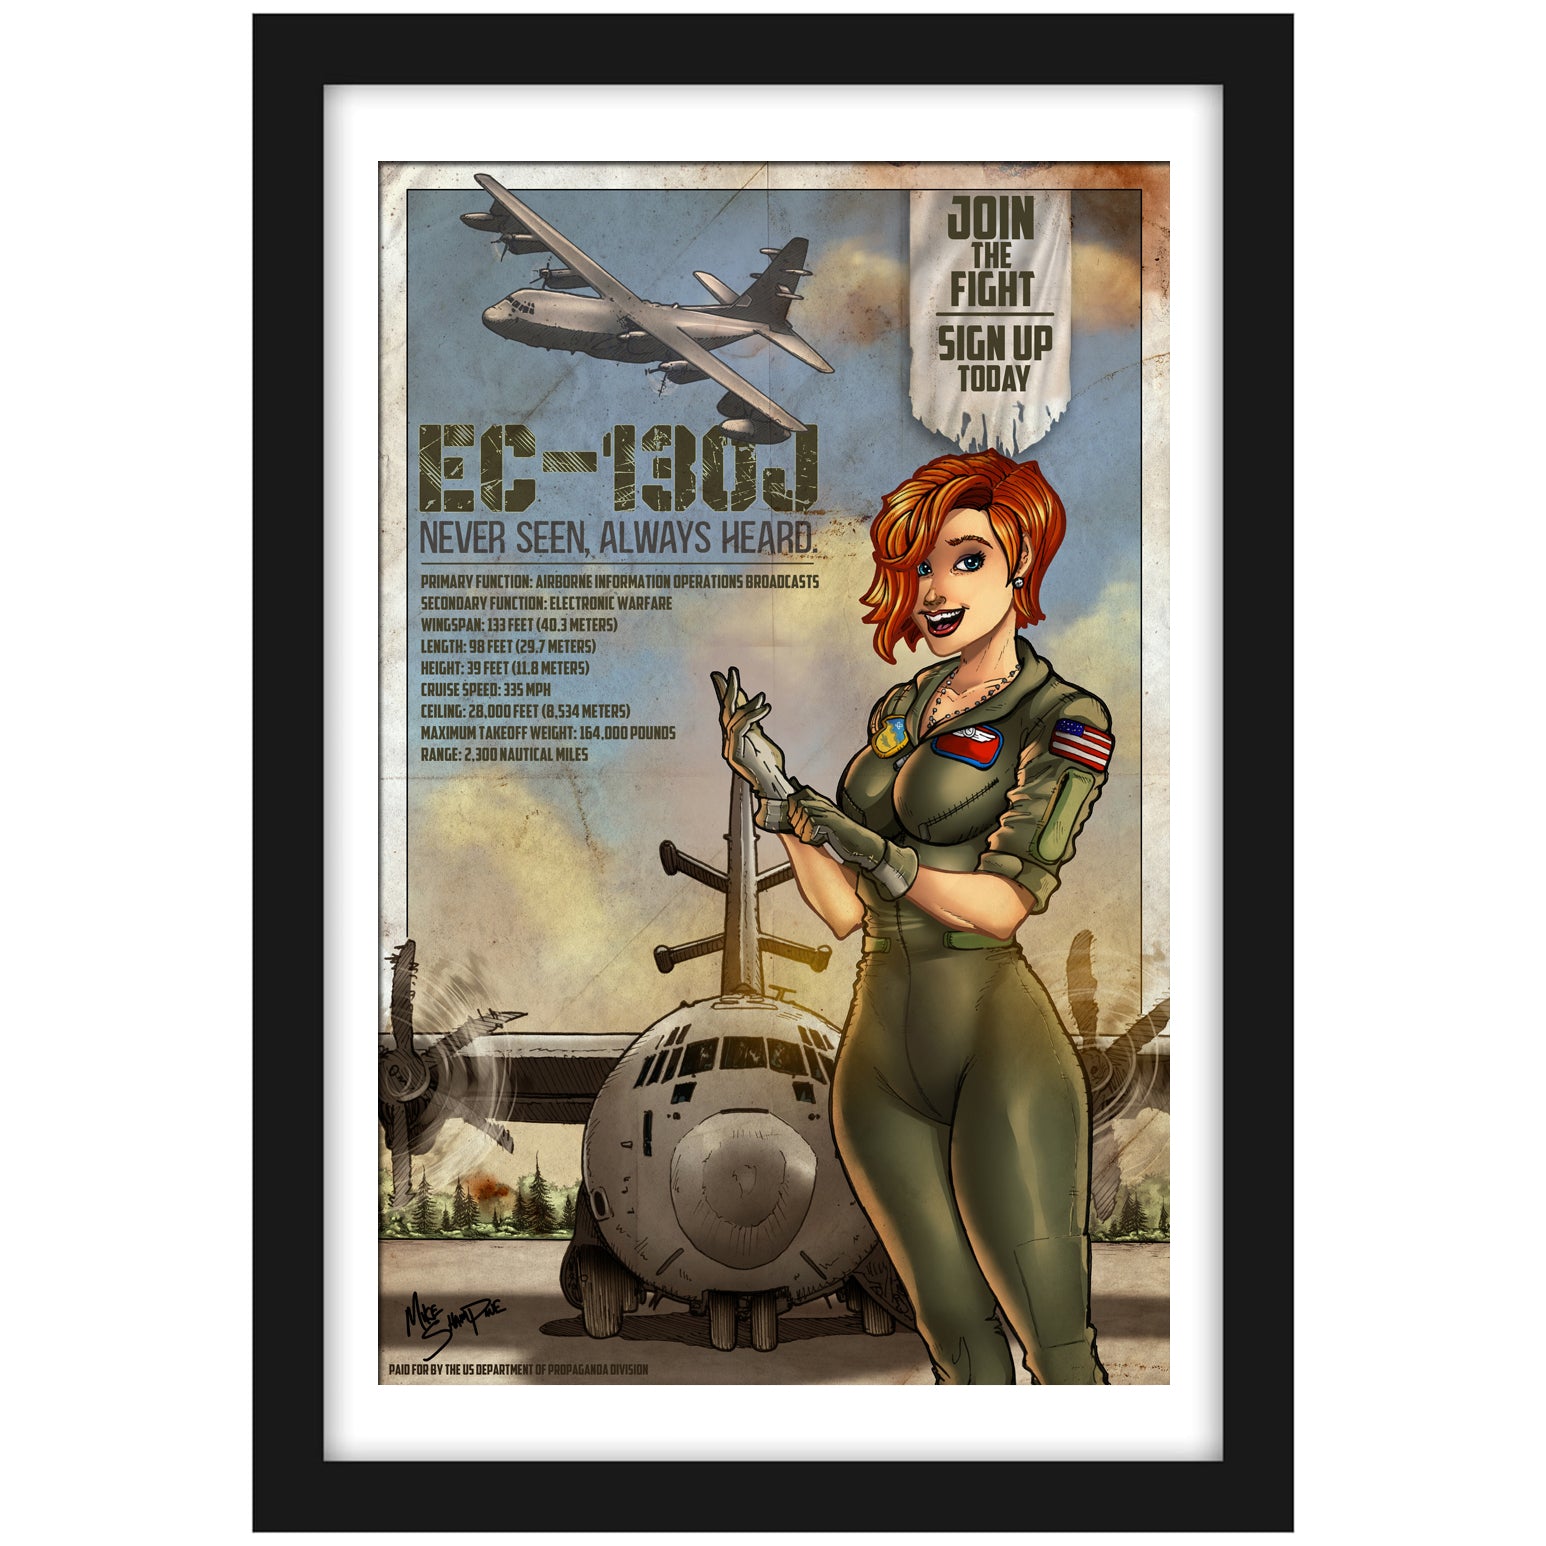 EC-130J - "Never Seen, Always Heard" - Vintage Print Pinup & Airplane Art by Mike Shampine - Signed and Numbered